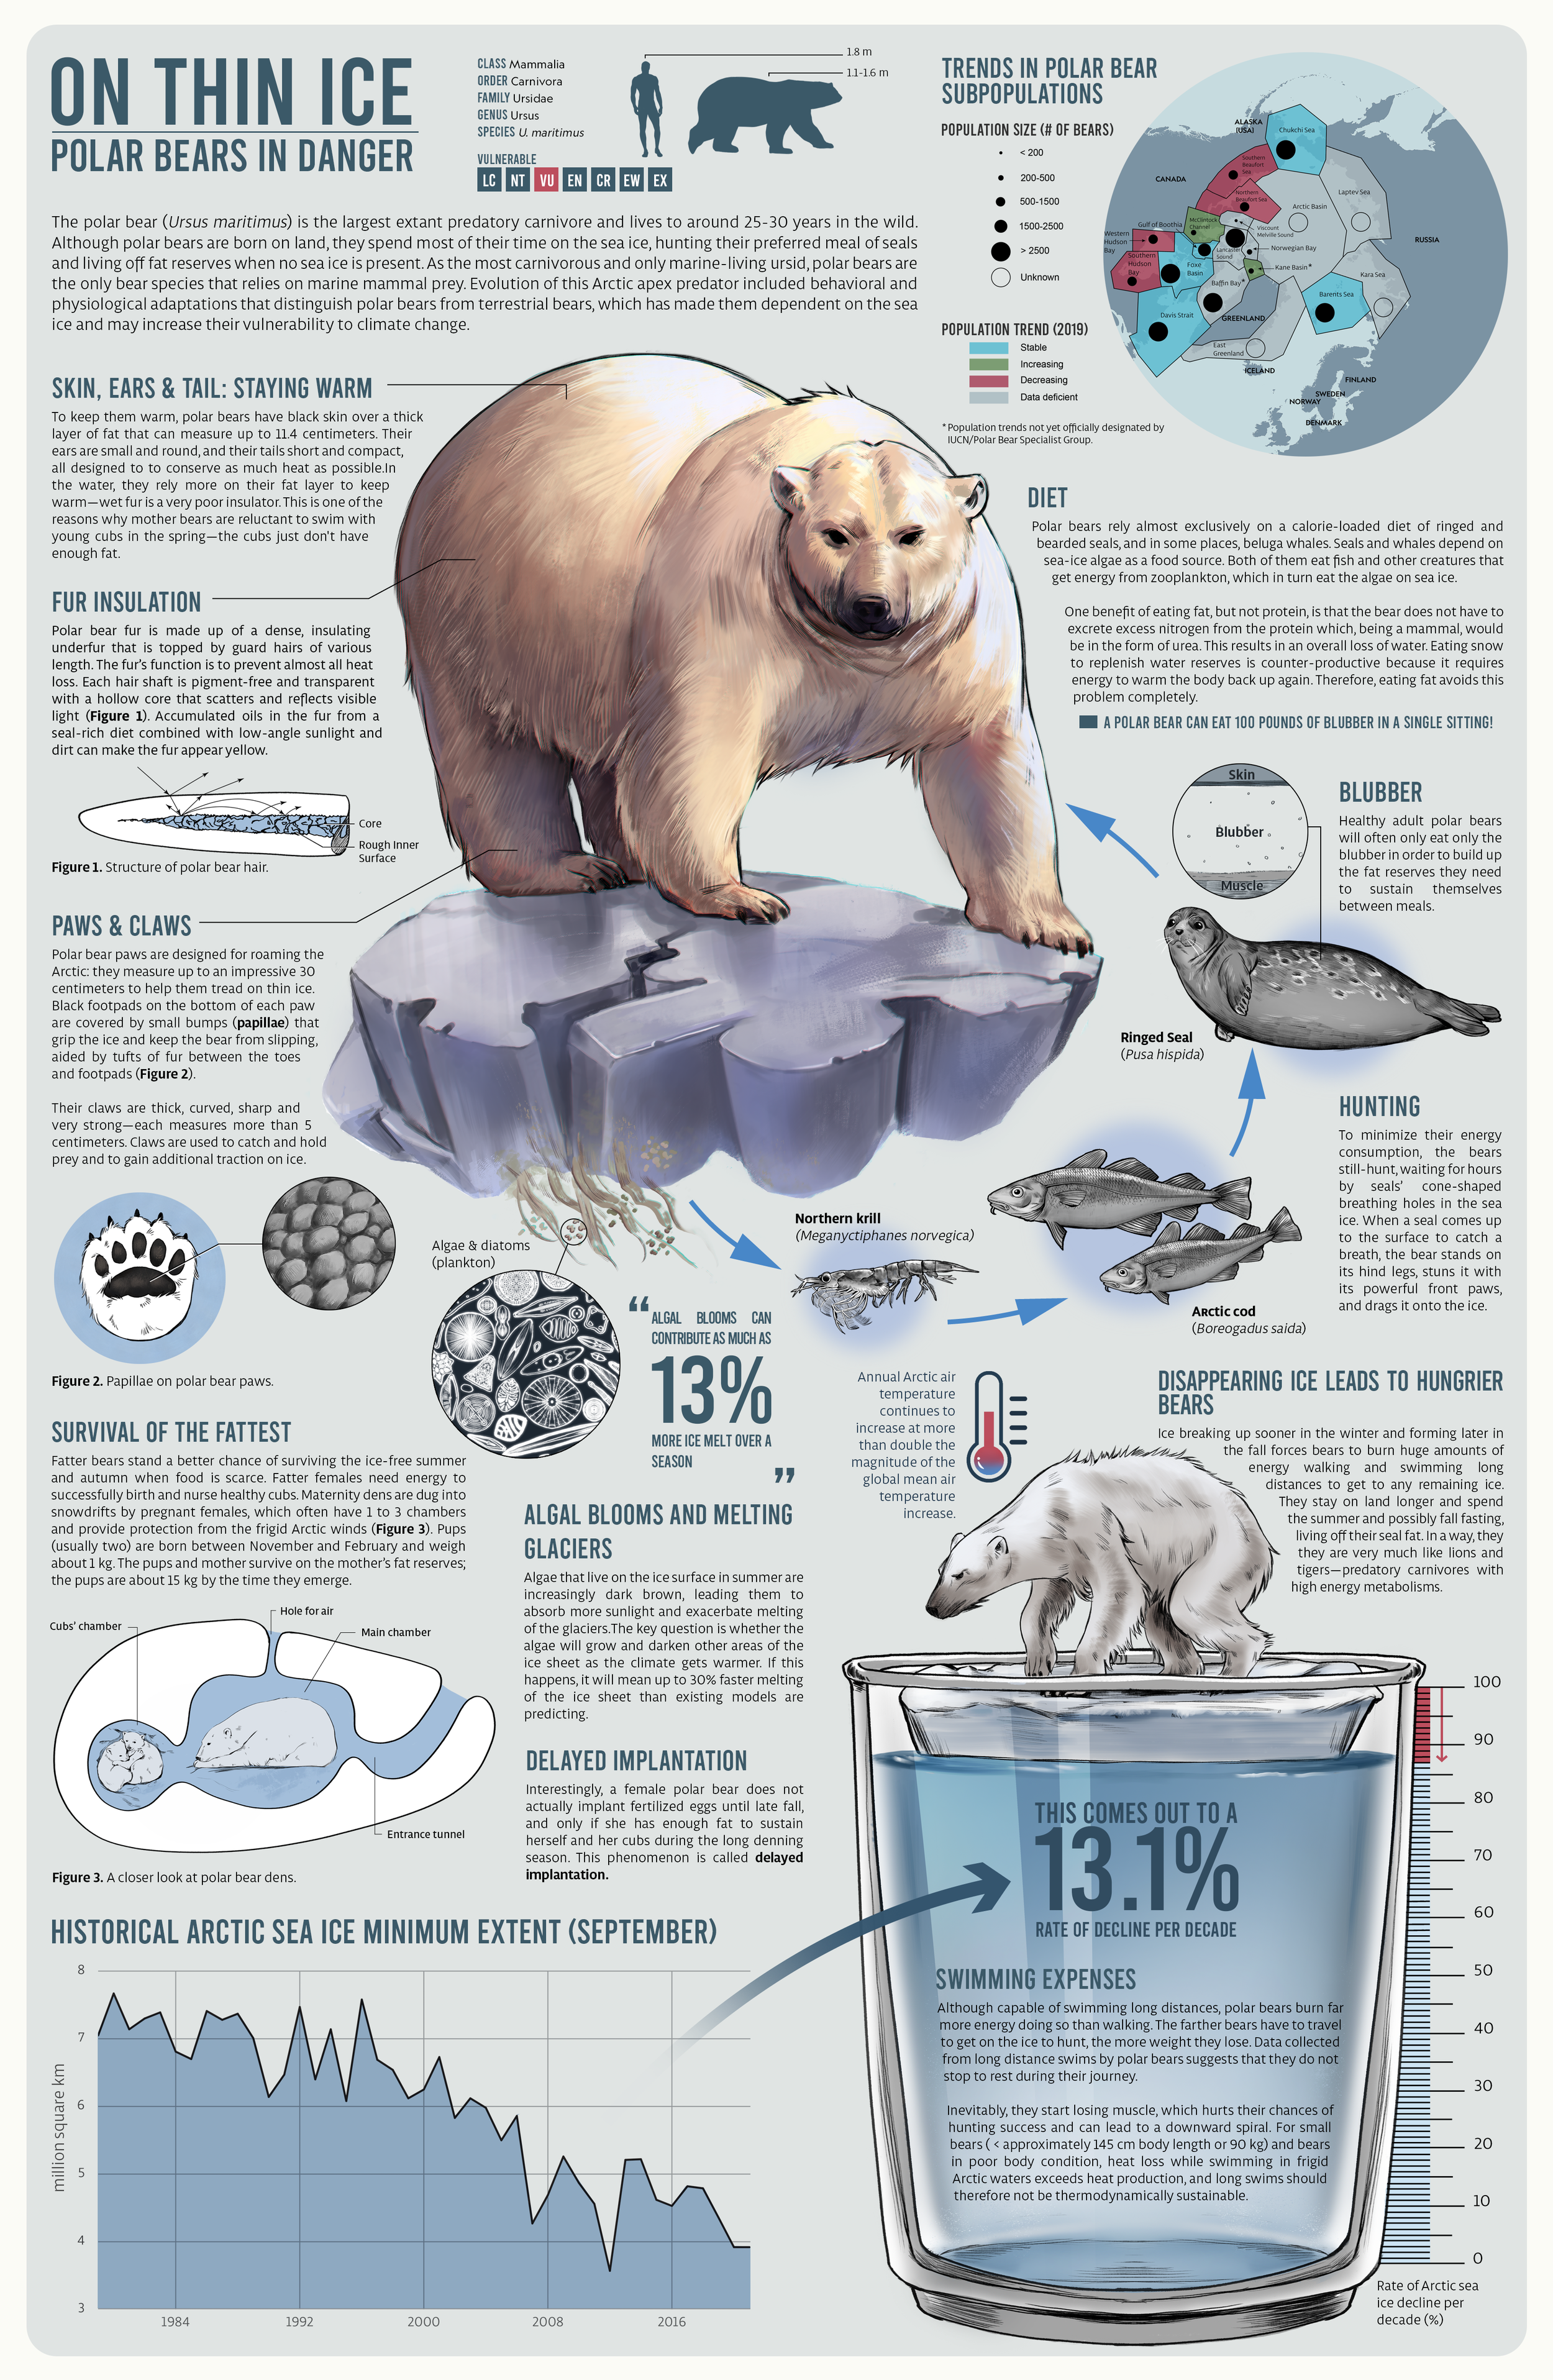 On thin ice: Infographic on threats to the polar bear population.